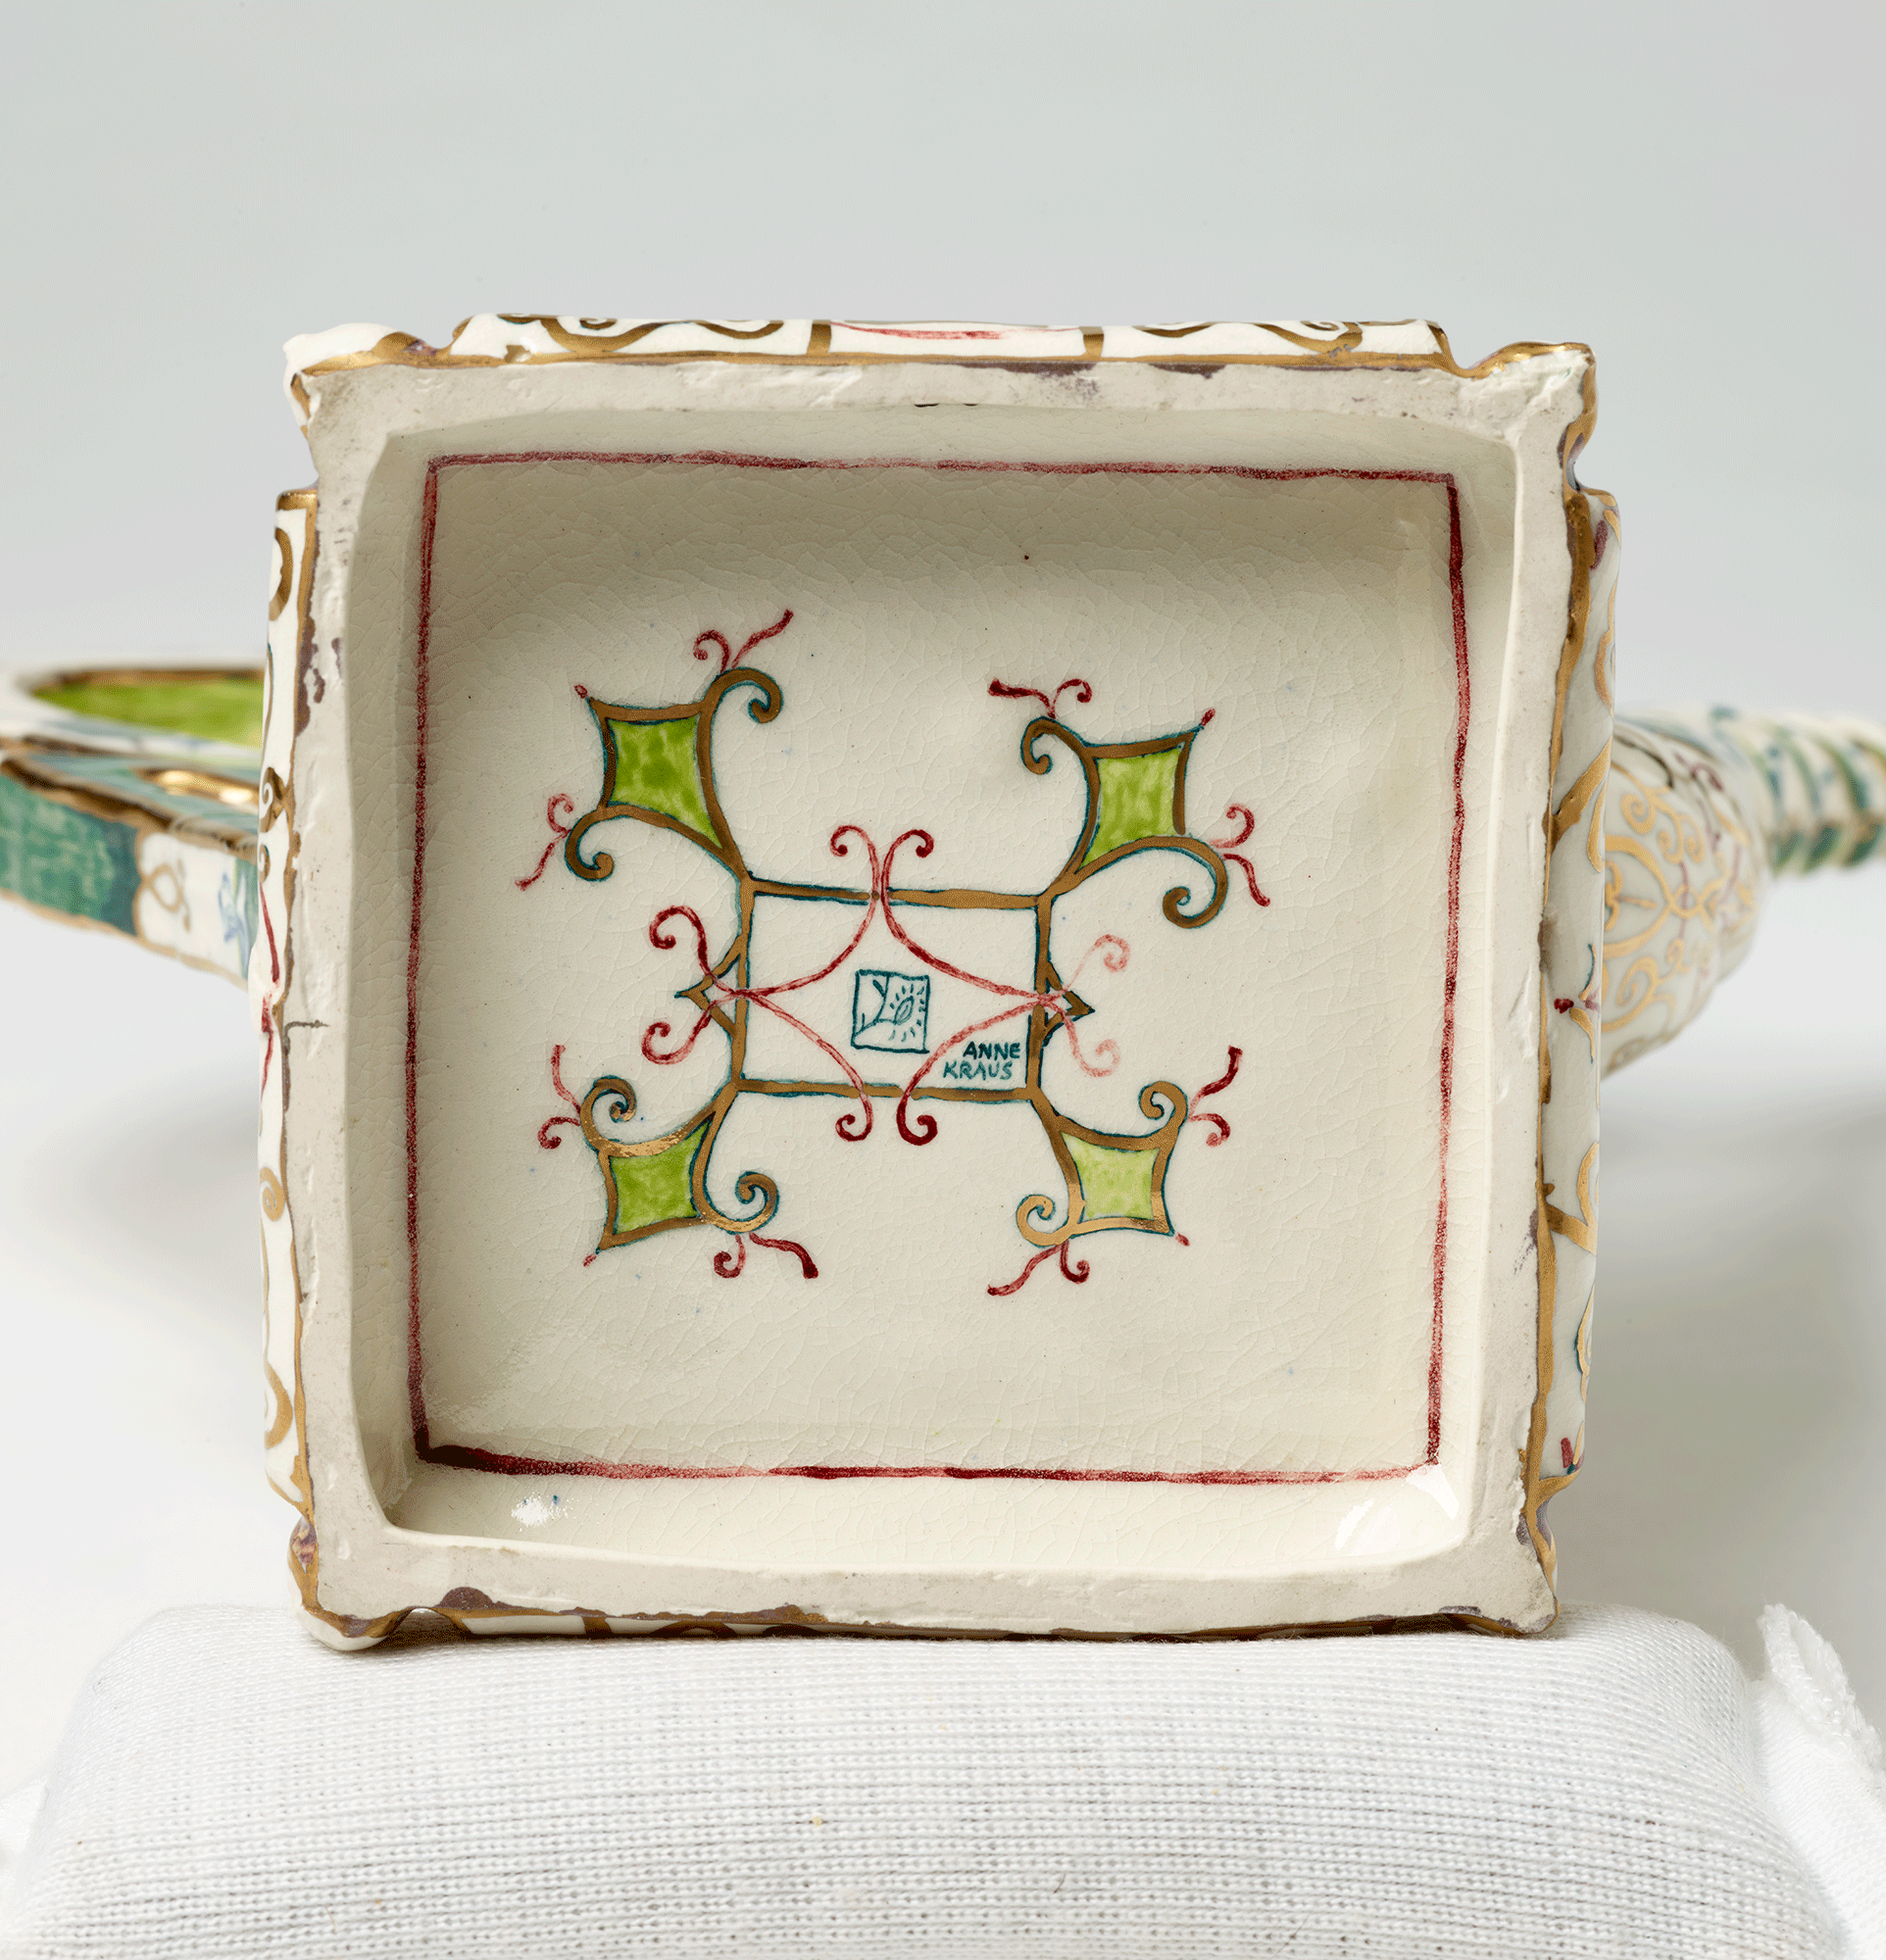 Square base of teapot with curving square and diamond-shaped painted design. The artist’s name, “Anne Kraus” is painted in small blue letters in the center square.